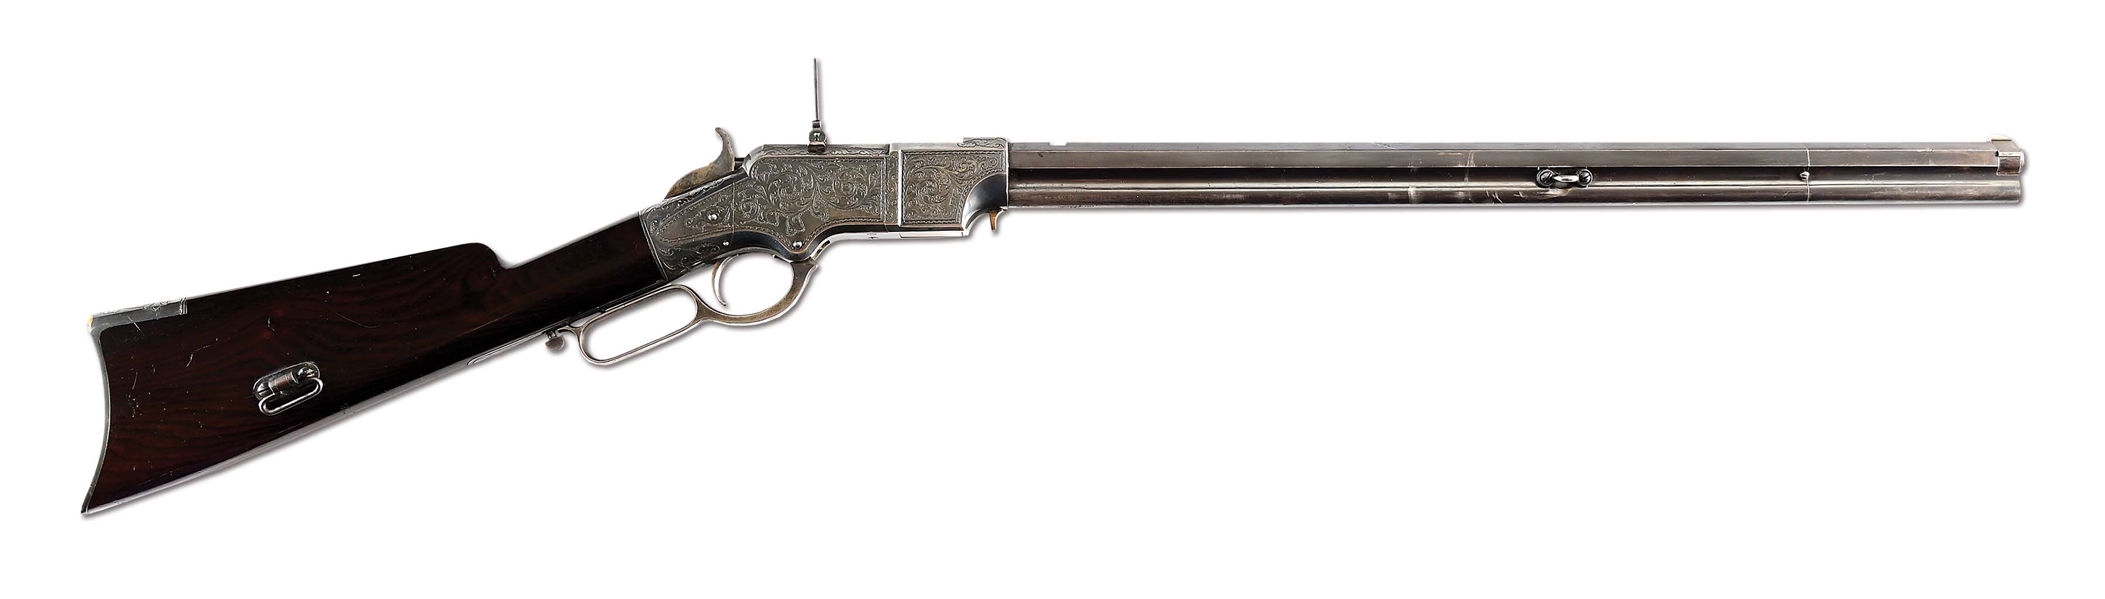 (A) MAGNIFICENT 1860 HENRY FACTORY ENGRAVED & SILVER PLATED RIFLE (1862).